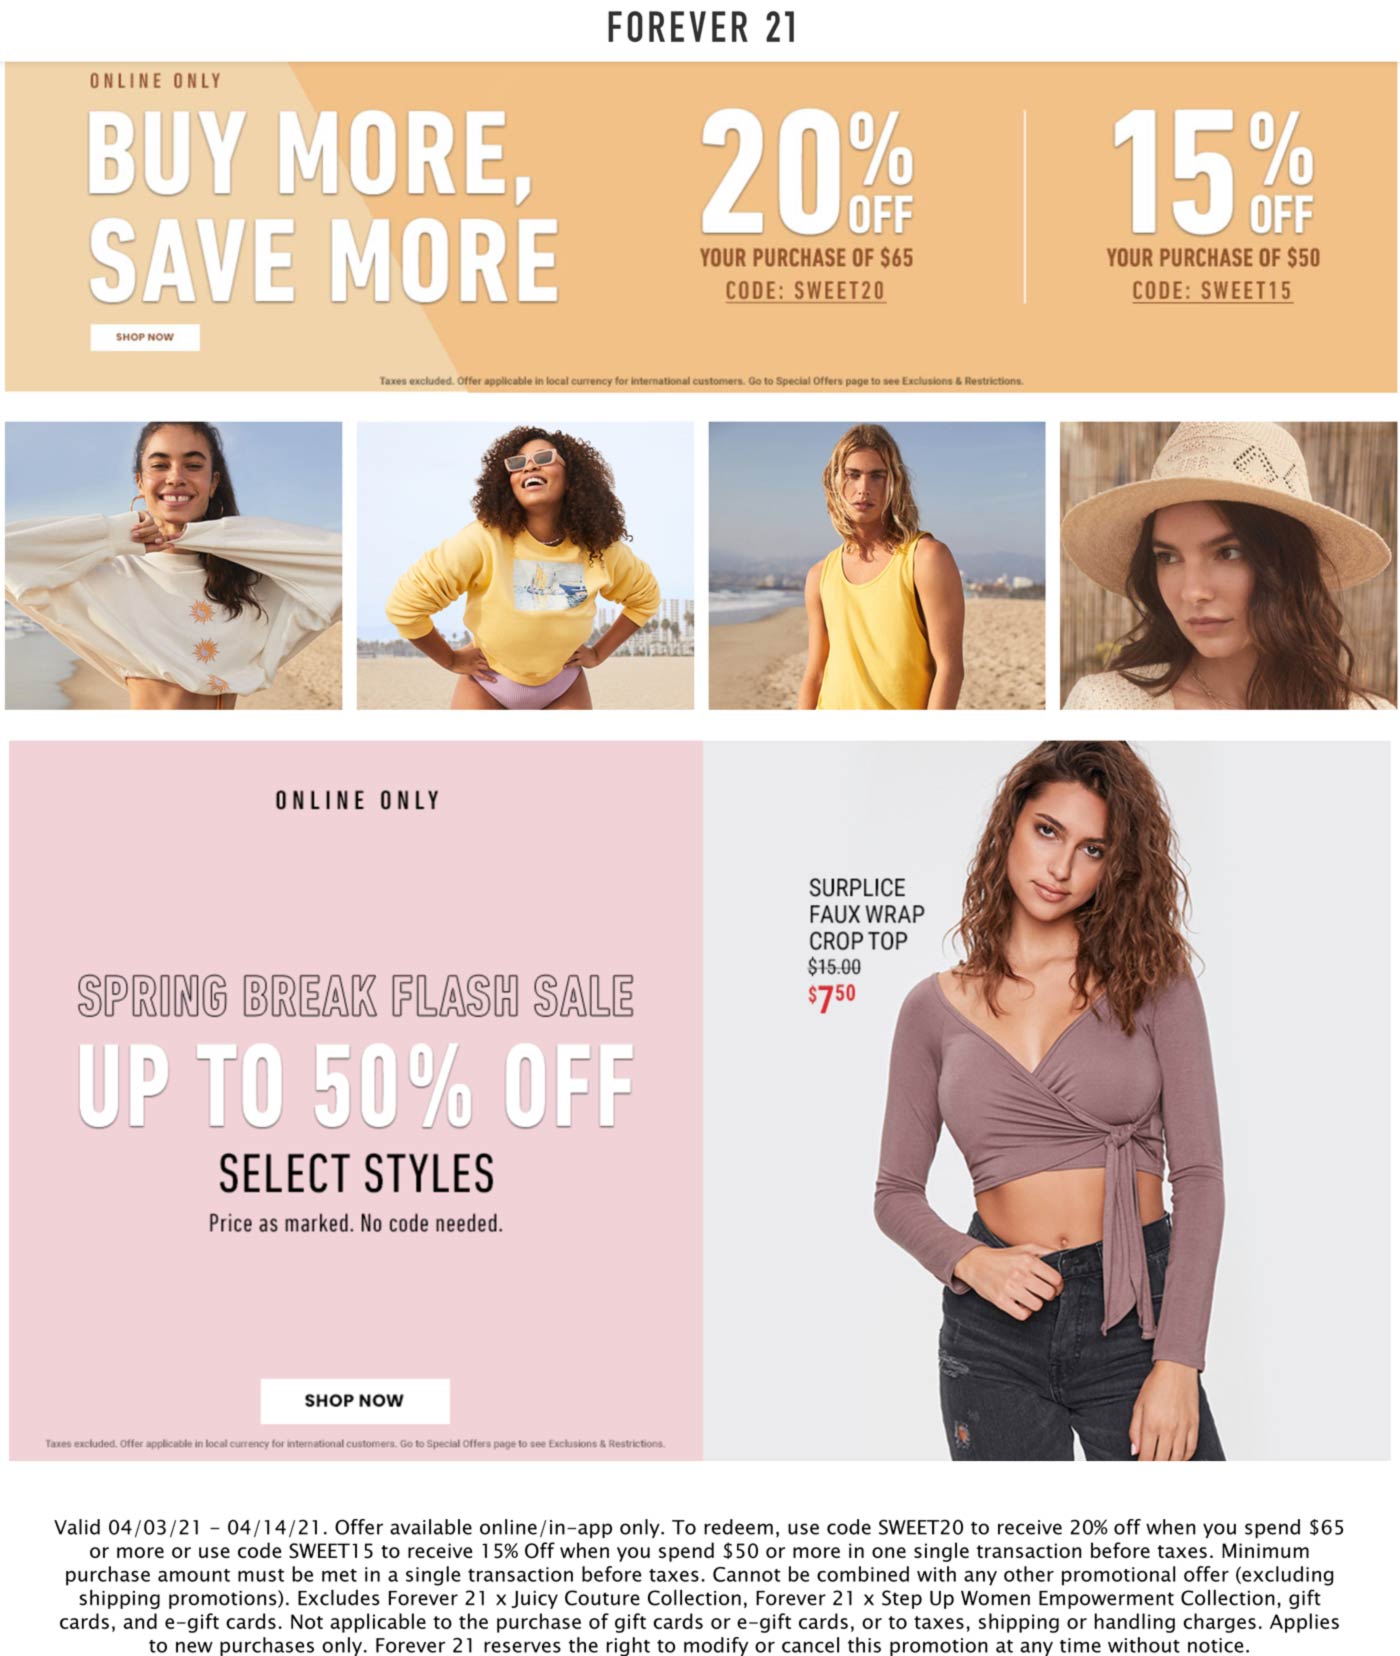 Forever 21 stores Coupon  15-20% off $50+ at Forever 21 via promo code SWEET15 and SWEET20 #forever21 